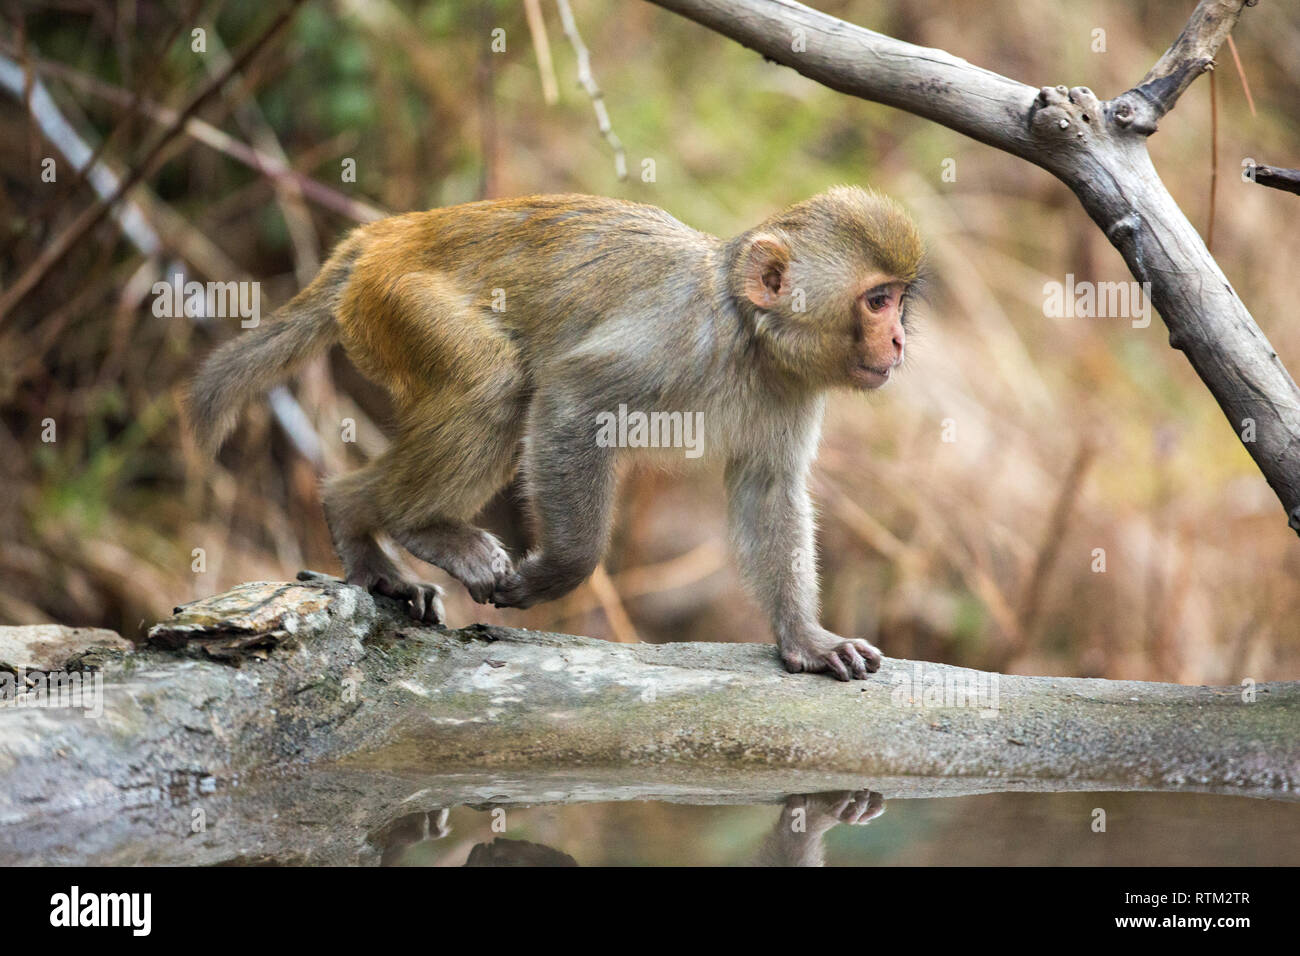 Young Rhesus Macaque (Macaca mulatta). Walking on all four limbs. Plantigrade. Front and rear legs alternating in turn whilst walking. Quadrupedal locomotion. Stock Photo